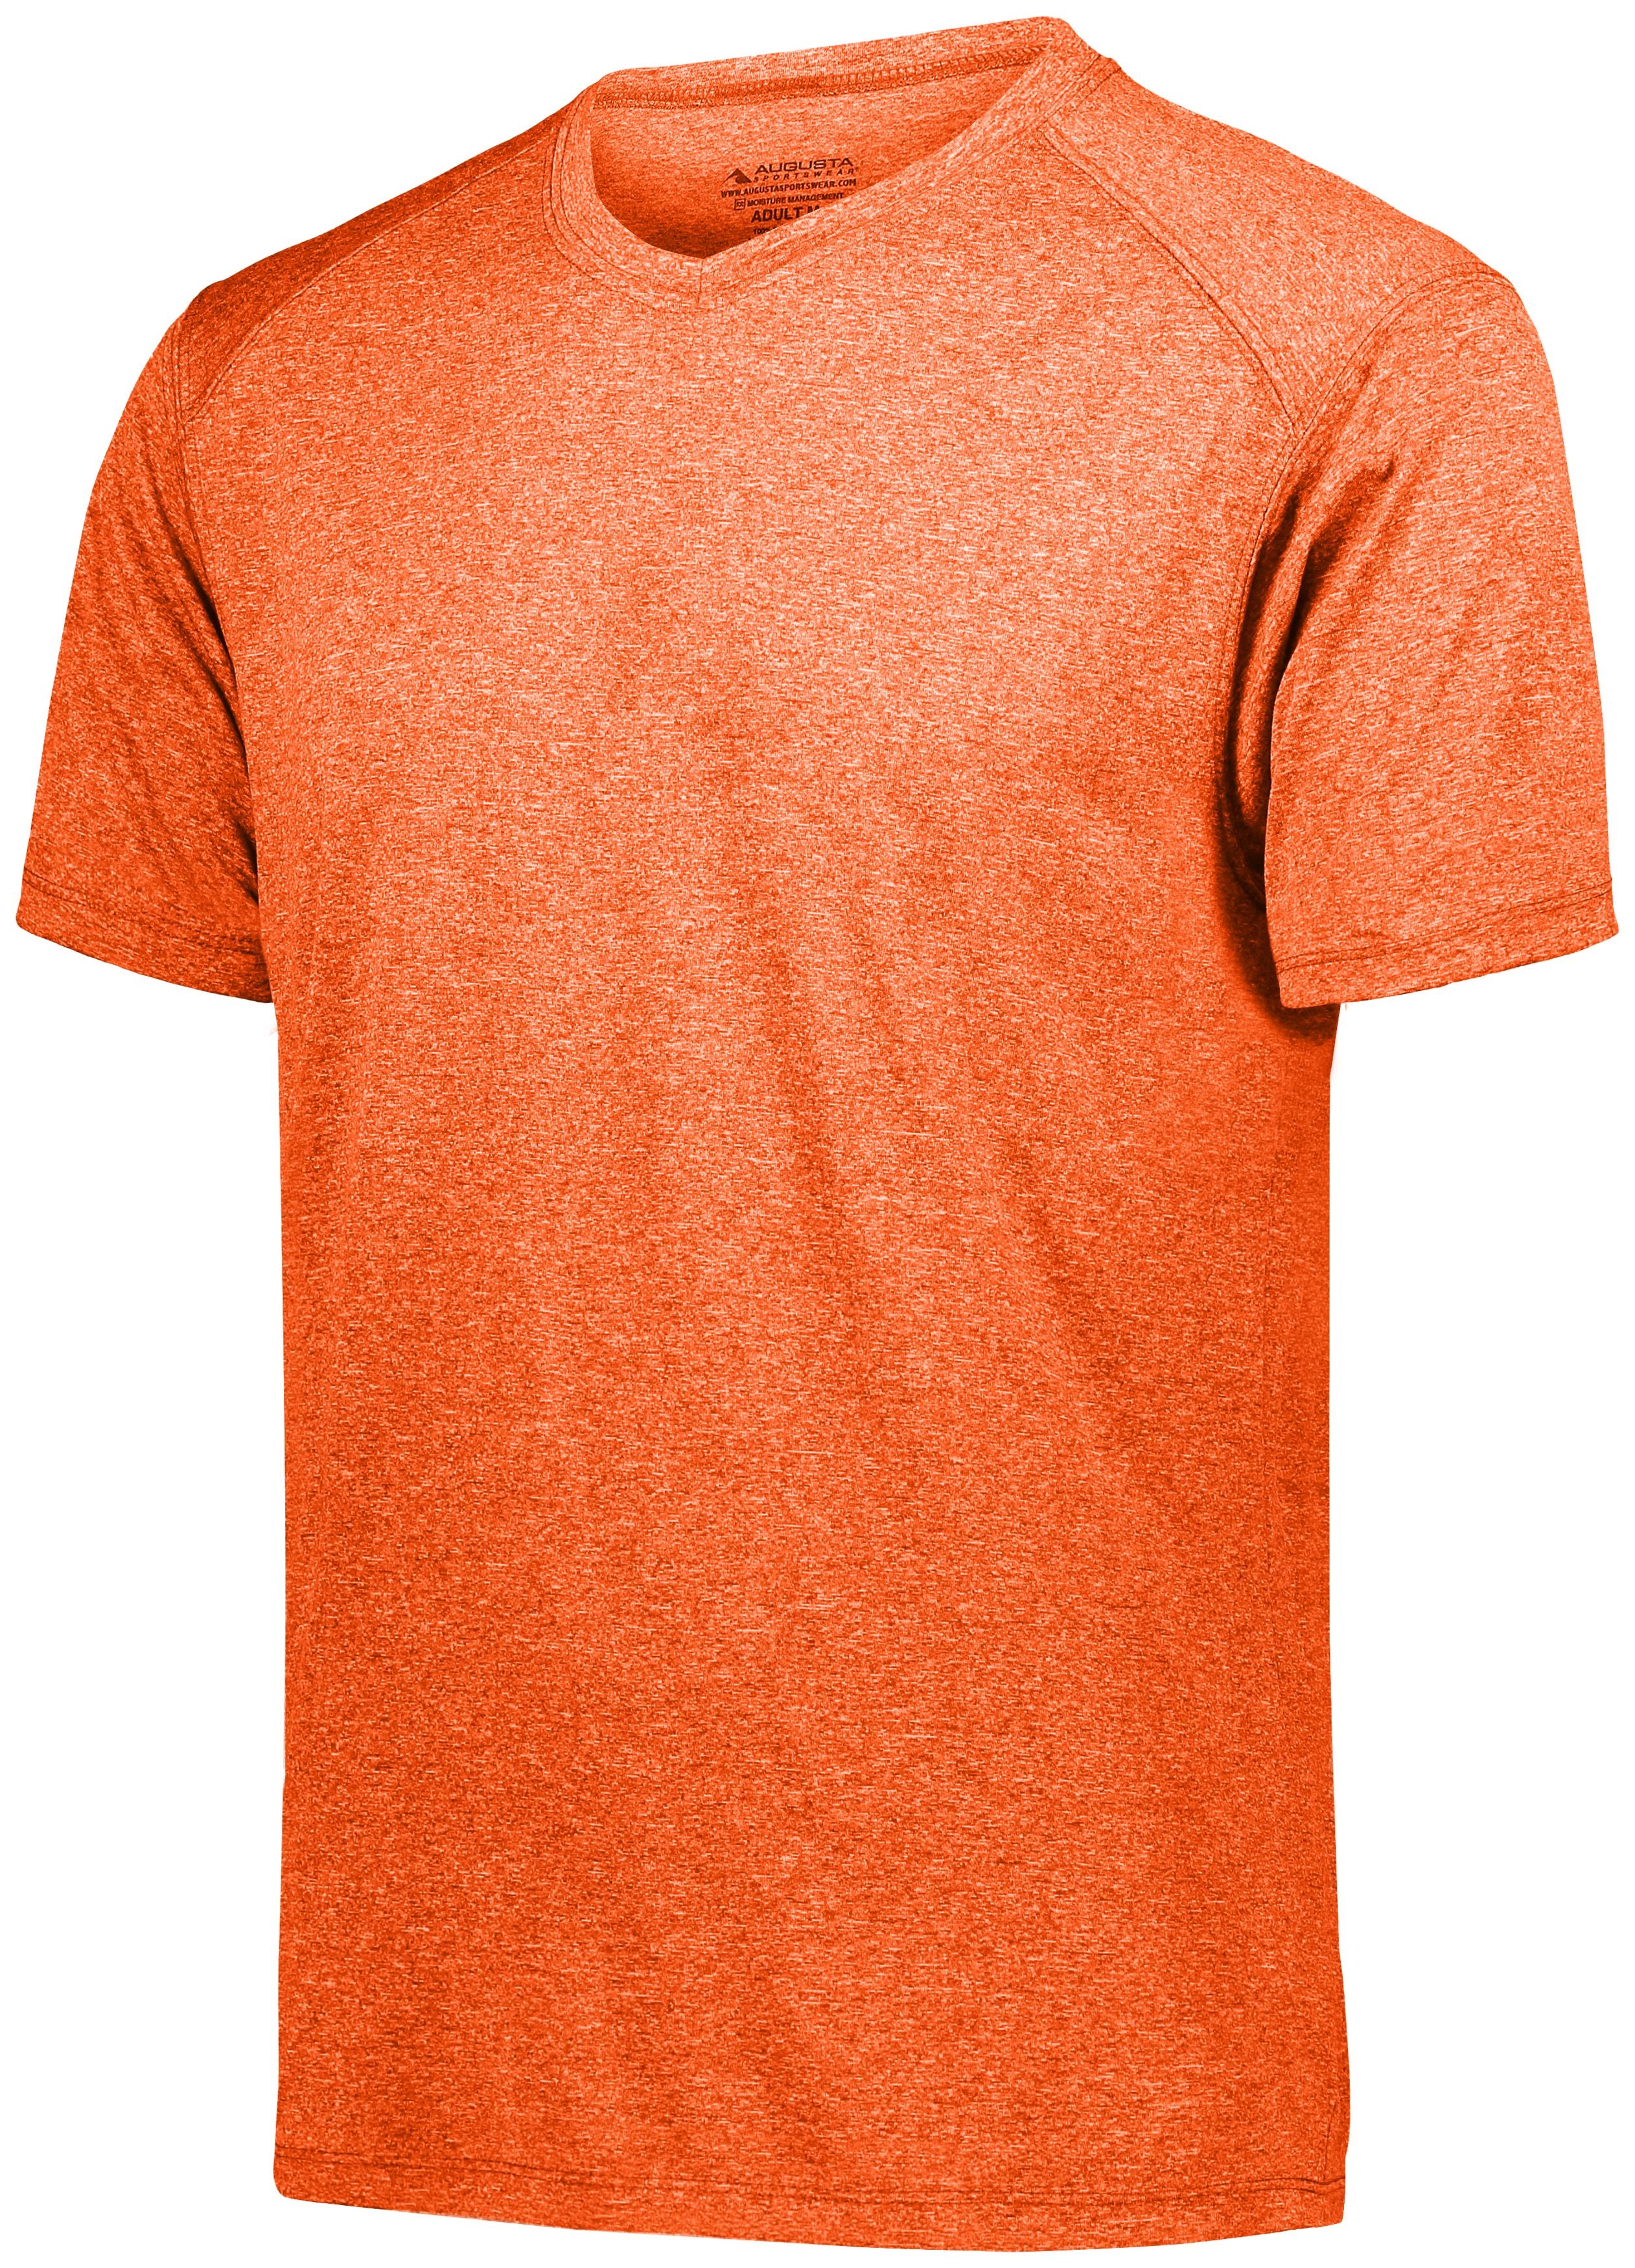 Augusta Sportswear Kinergy Training Tee in Orange Heather  -Part of the Adult, Adult-Tee-Shirt, T-Shirts, Augusta-Products, Shirts product lines at KanaleyCreations.com